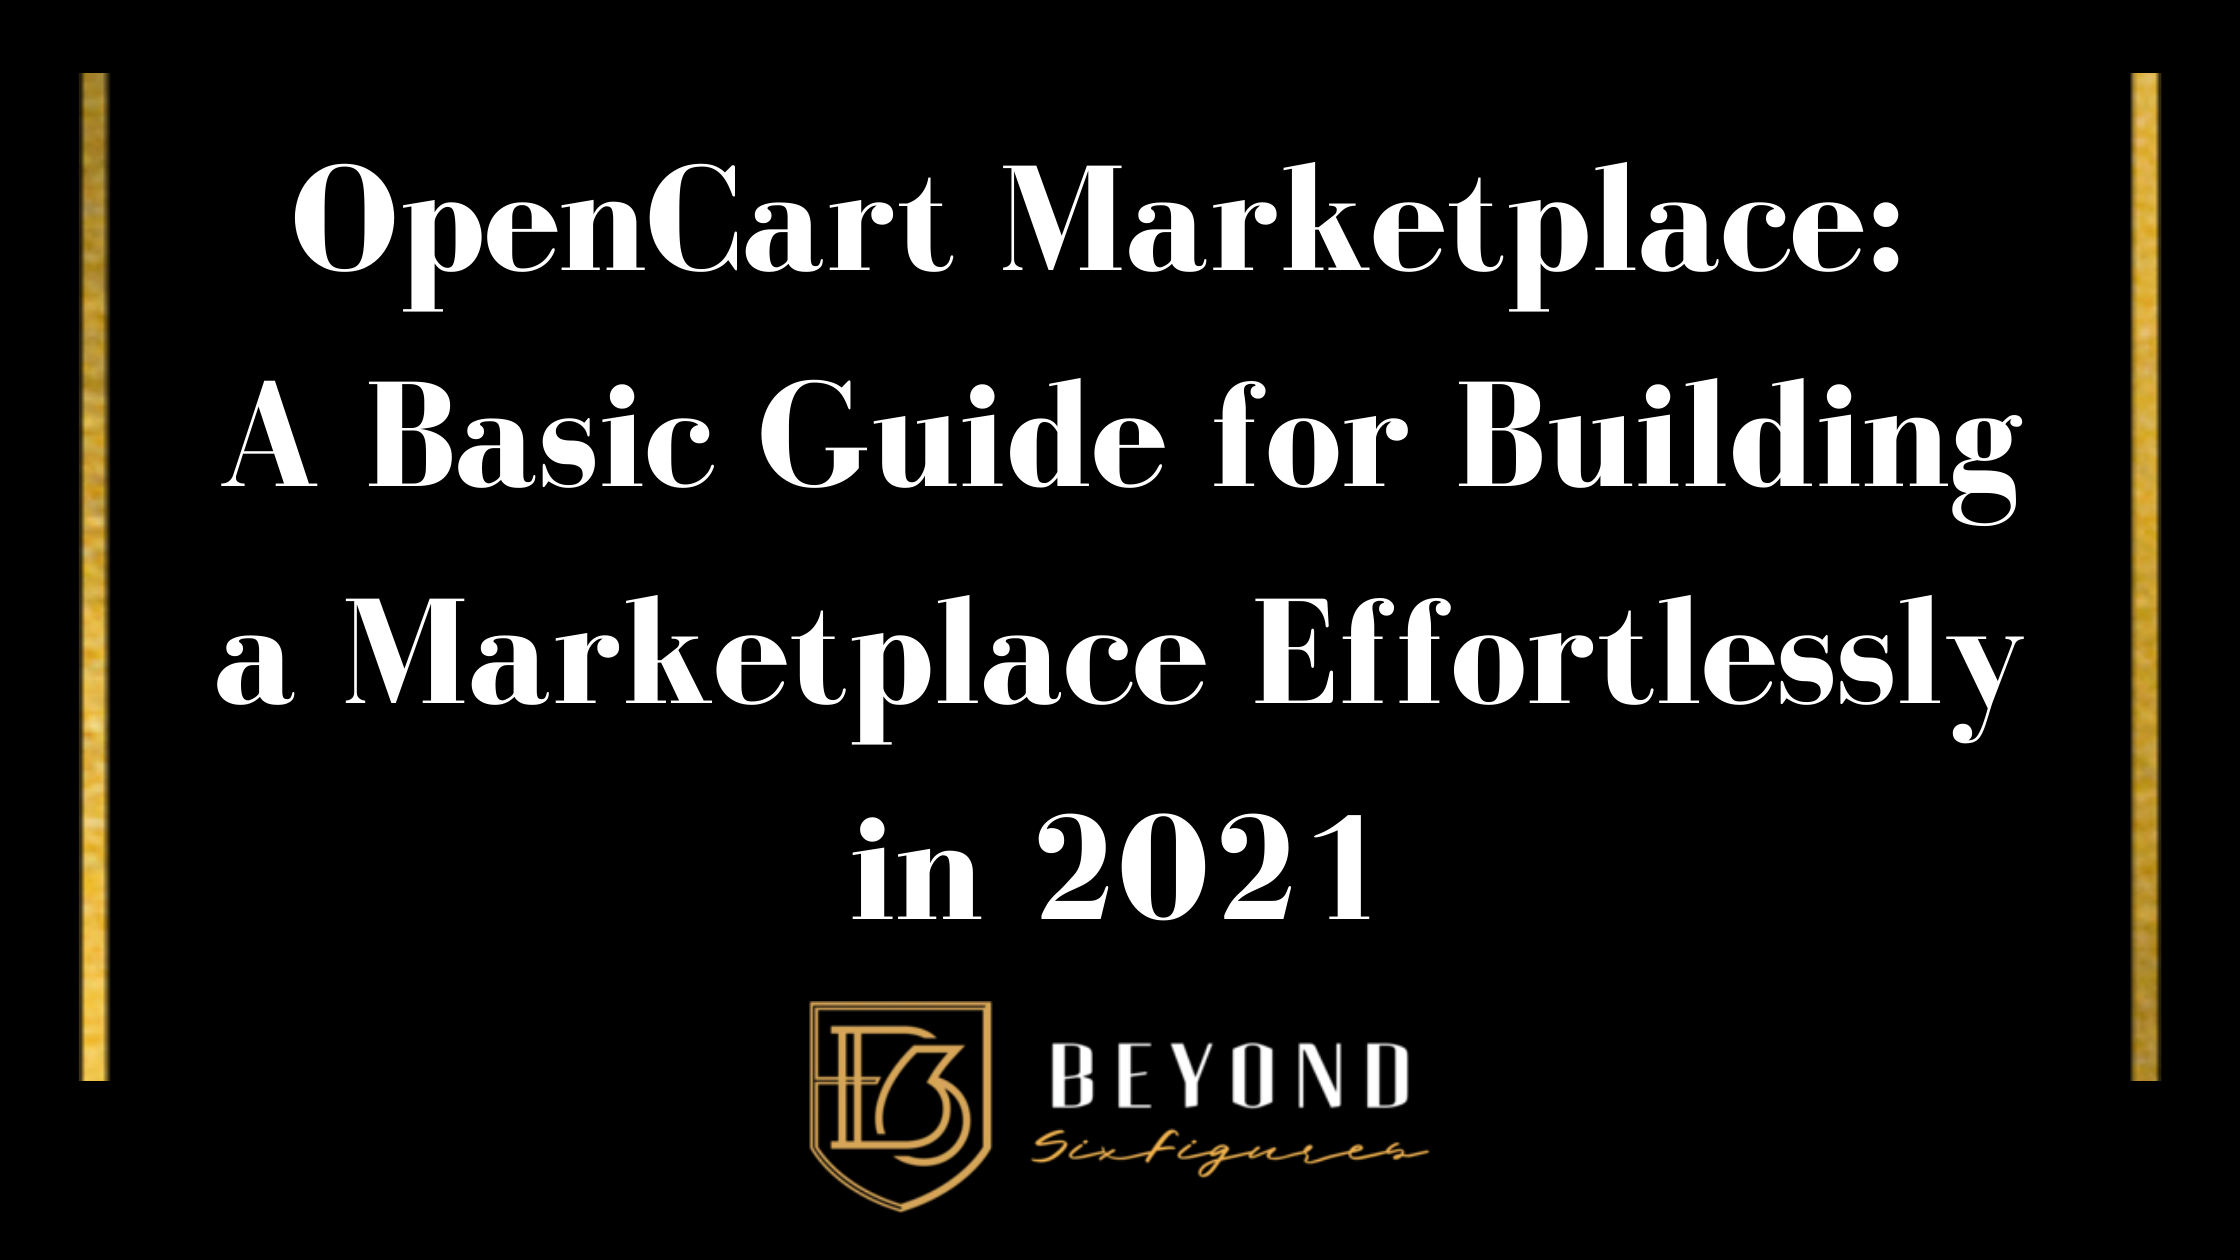 OpenCart Marketplace: A Basic Guide for Building a Marketplace Effortlessly in 2021